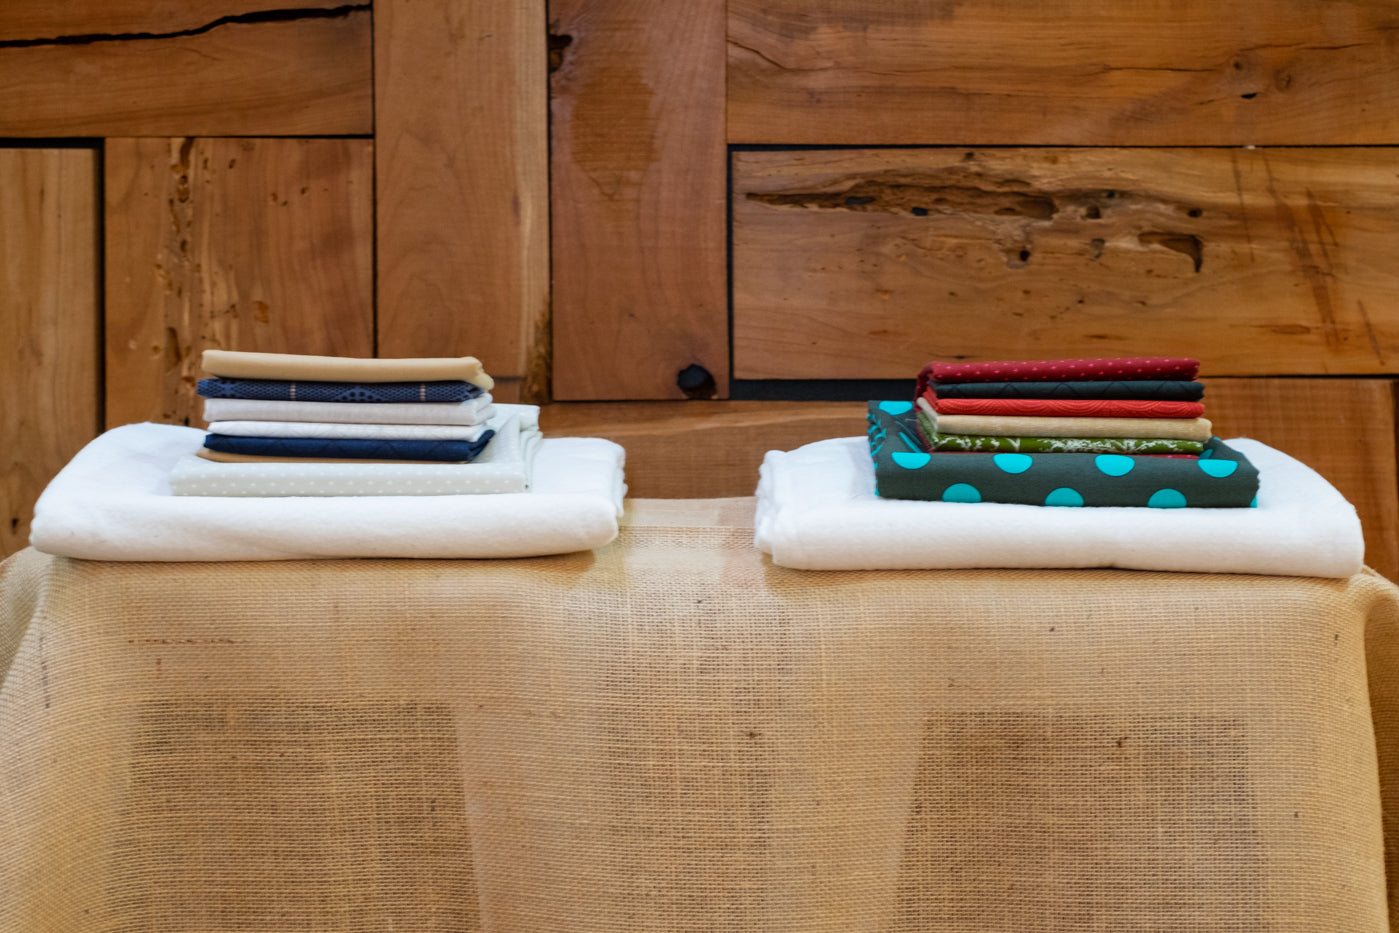 Material perfectly folded in two separate piles, on top of a burlap table with wooden backdrop.